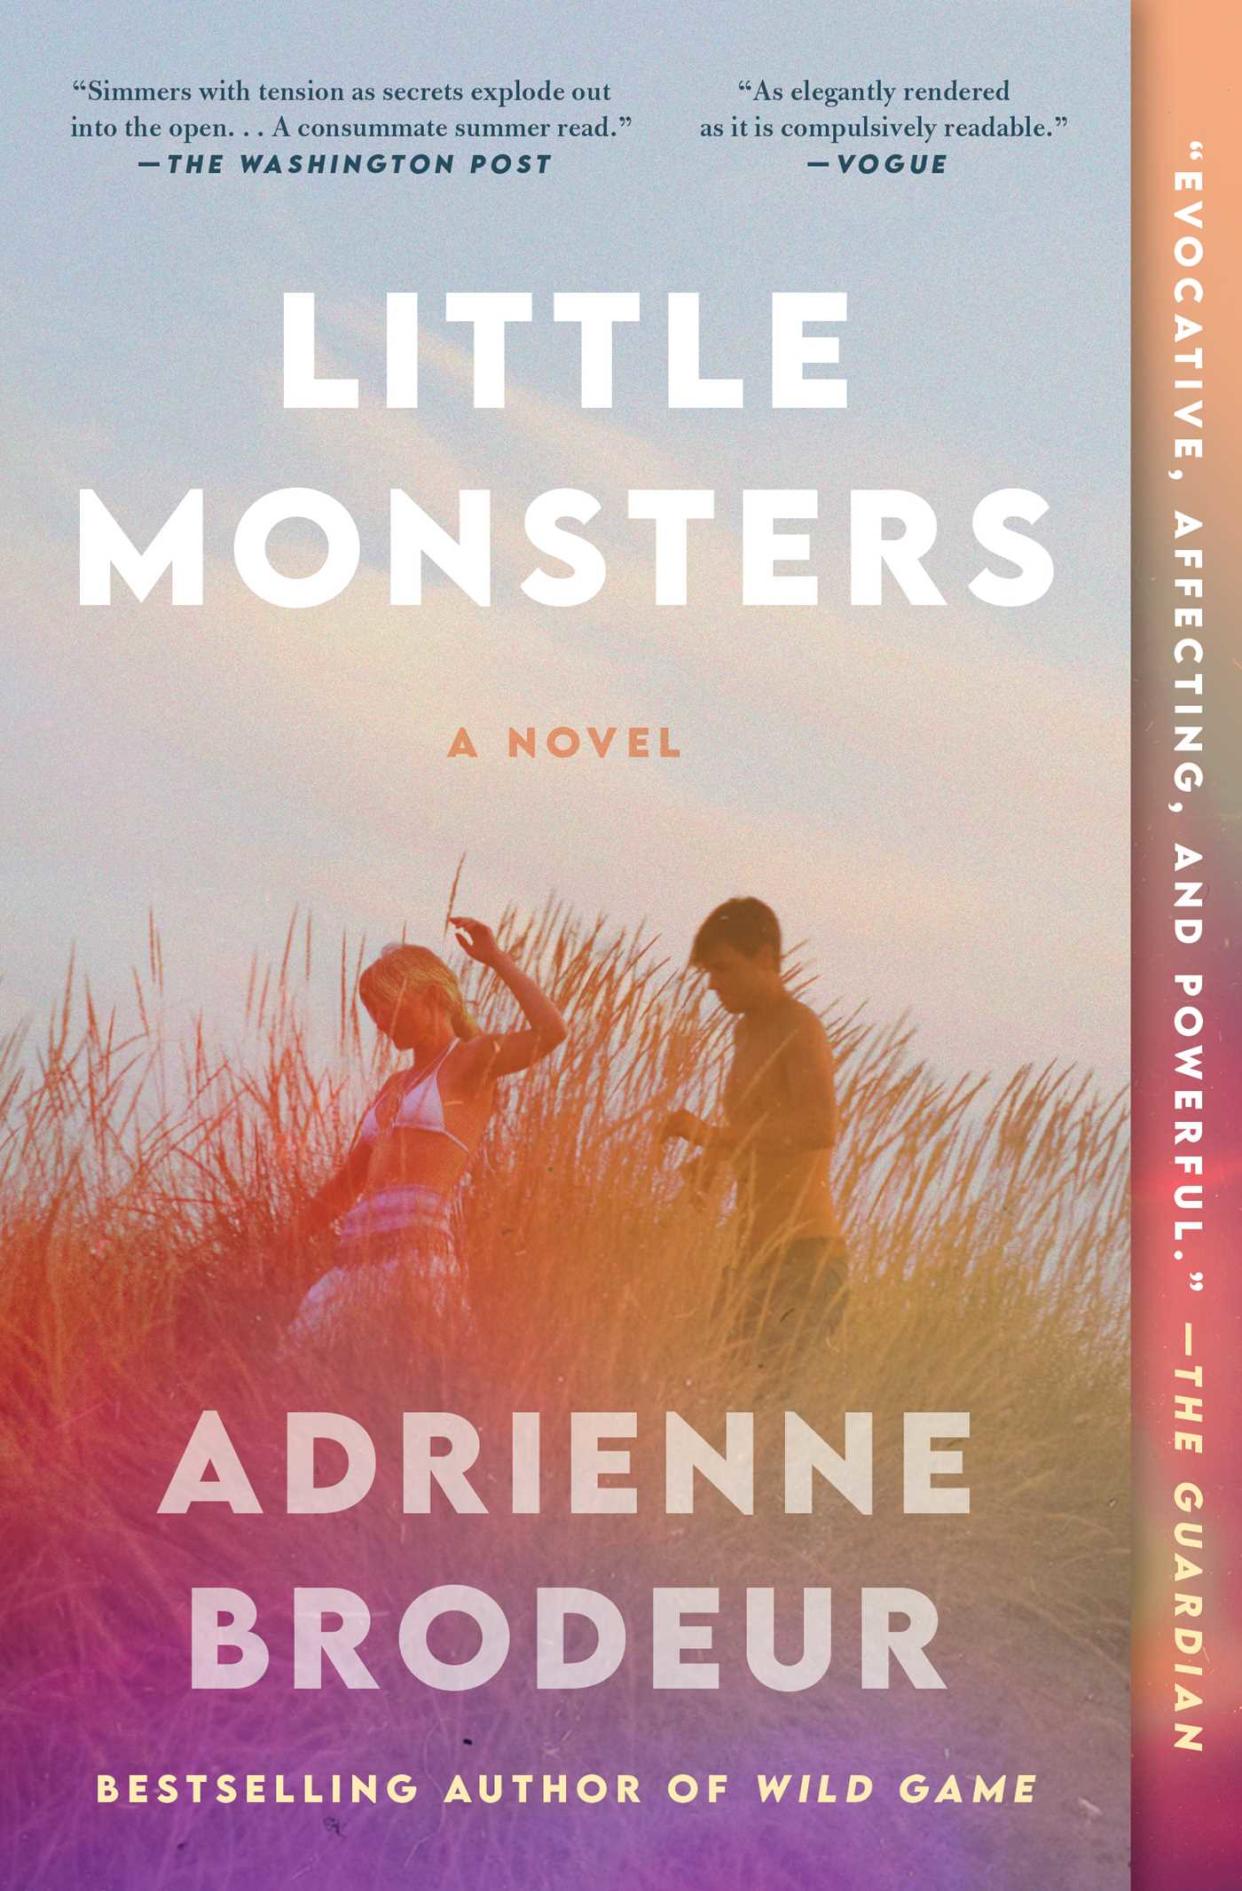 The national bestseller "Little Monsters" returns to shelves with a new jacket and in paperback on May 7.